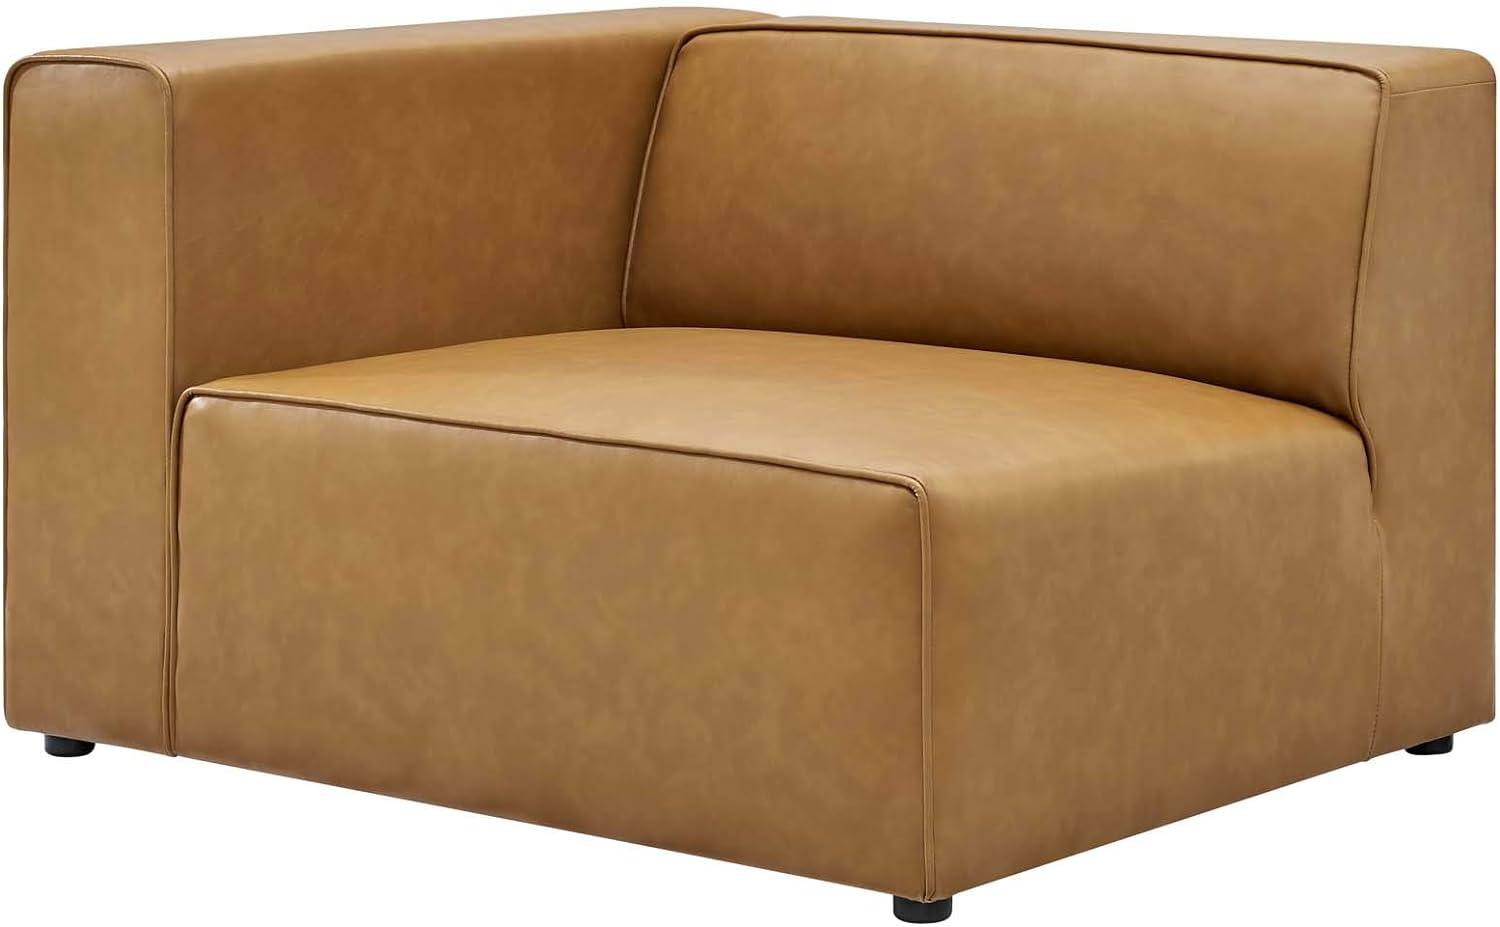 Mingle Contemporary 3-Piece Tan Faux Leather Sectional Sofa